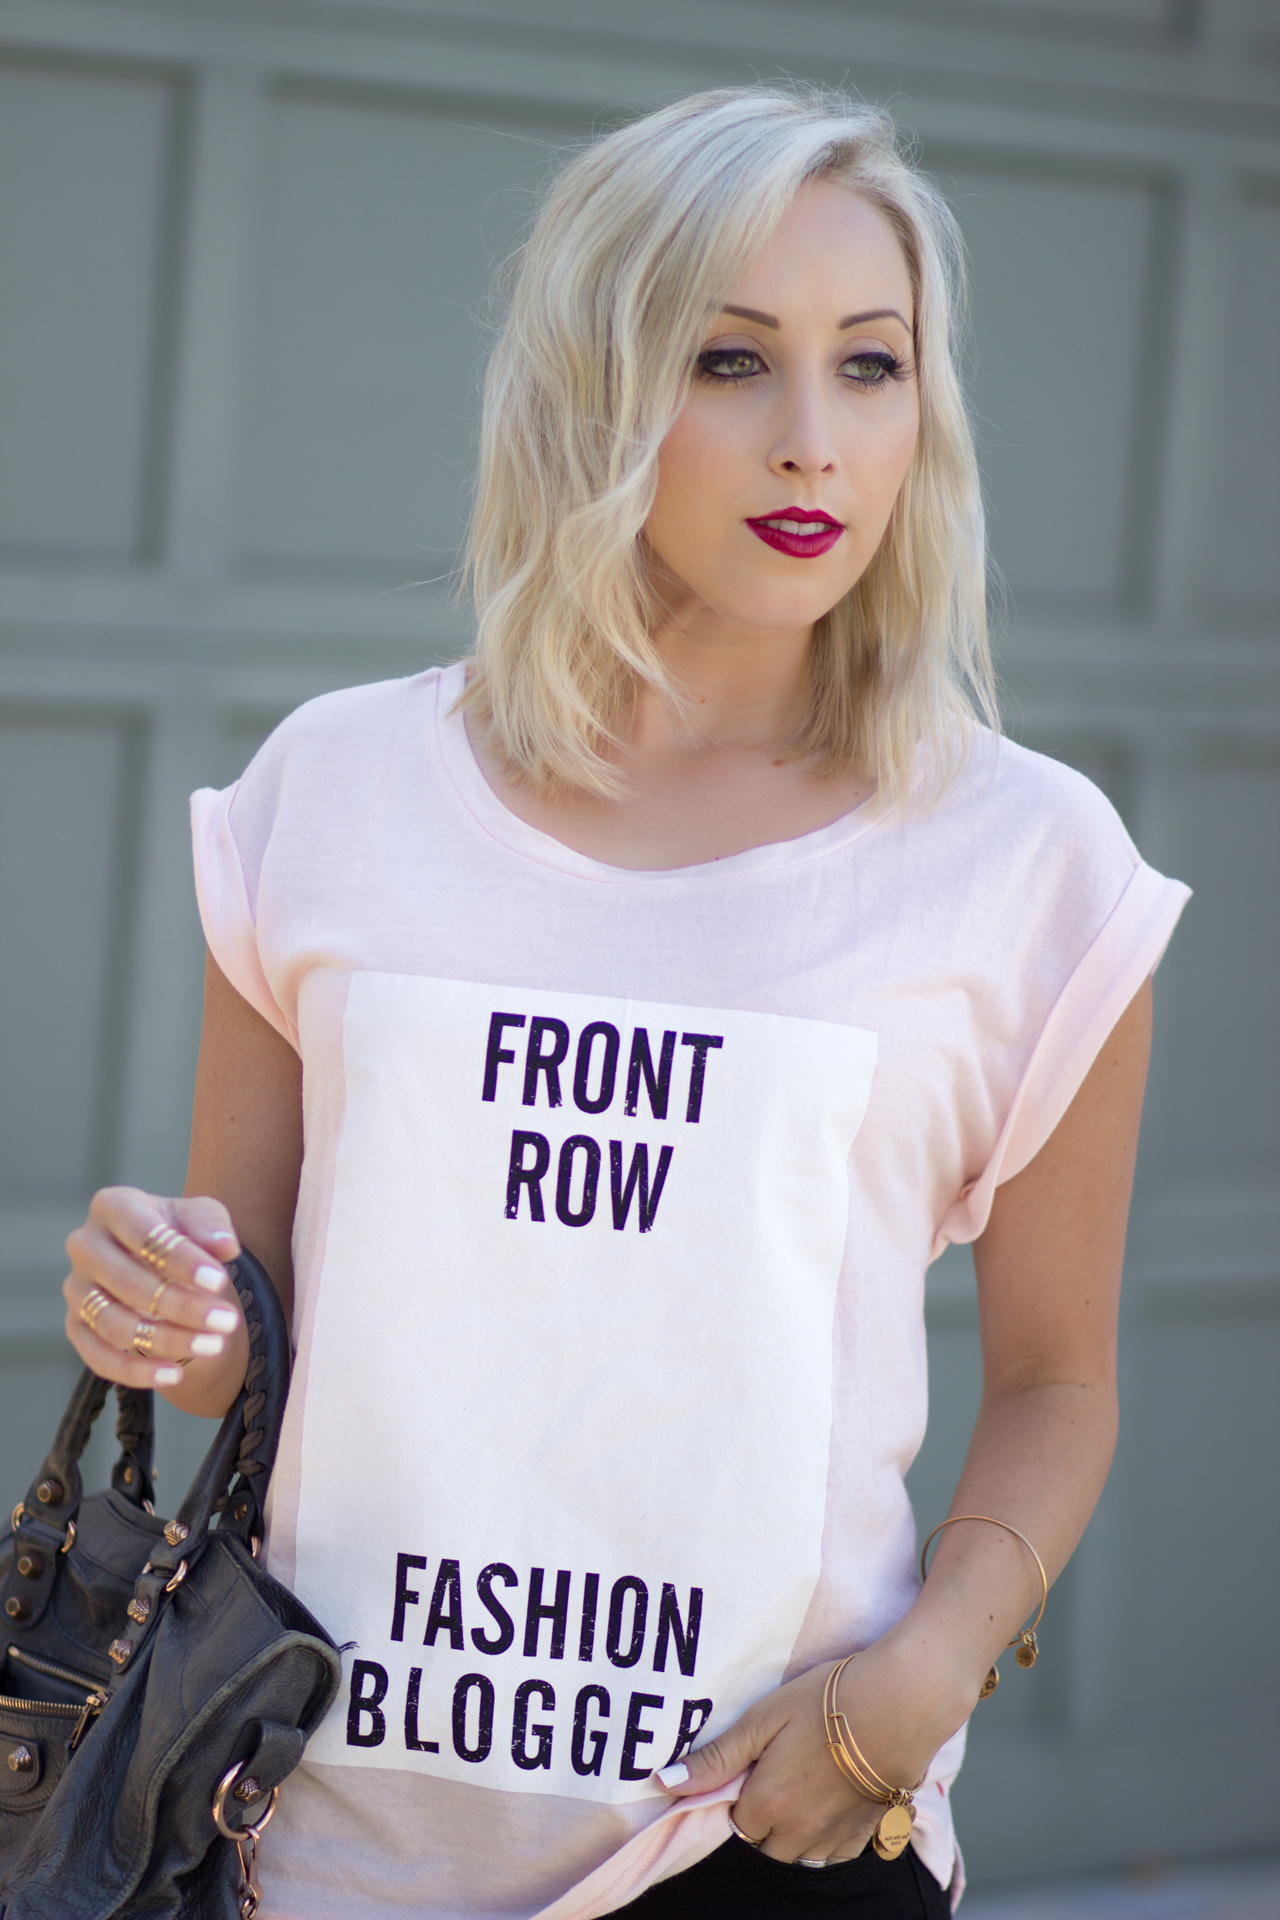 "Front Row Fashion Blogger" from @CastroFashion | StyledByBlondie.com